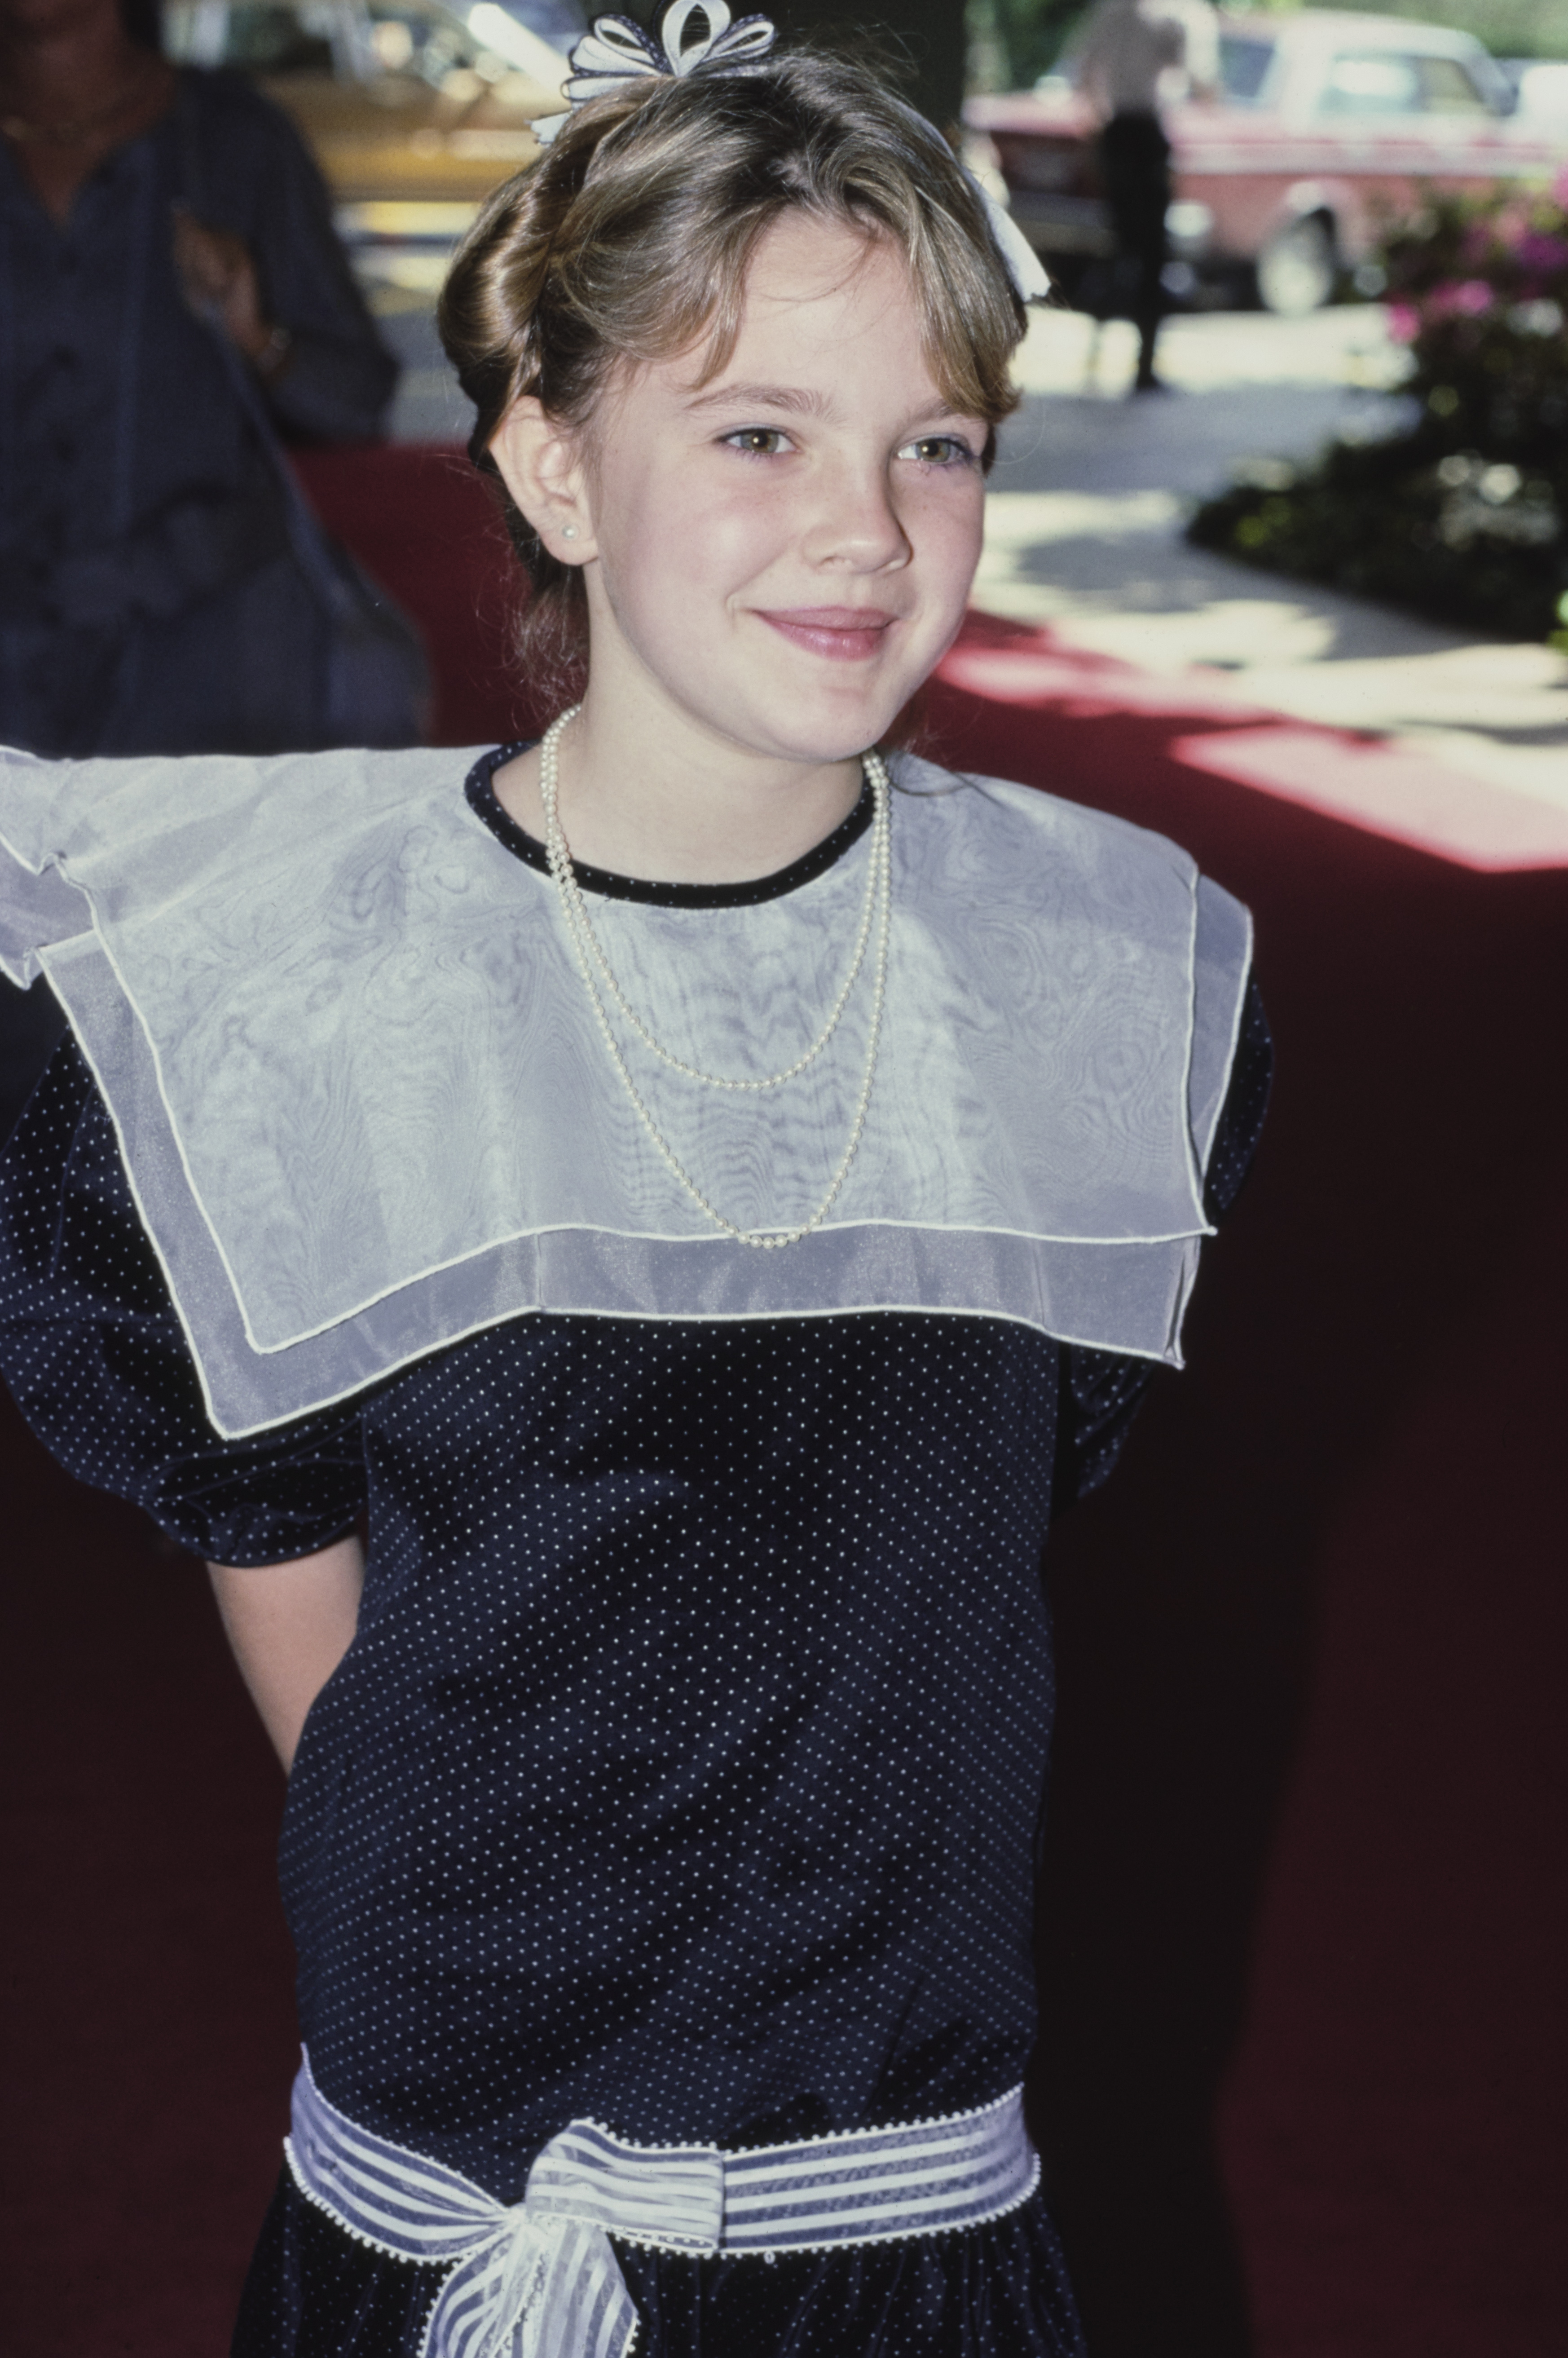 Drew Barrymore in Beverly Hills, California, March 21, 1985. | Source: Getty Image